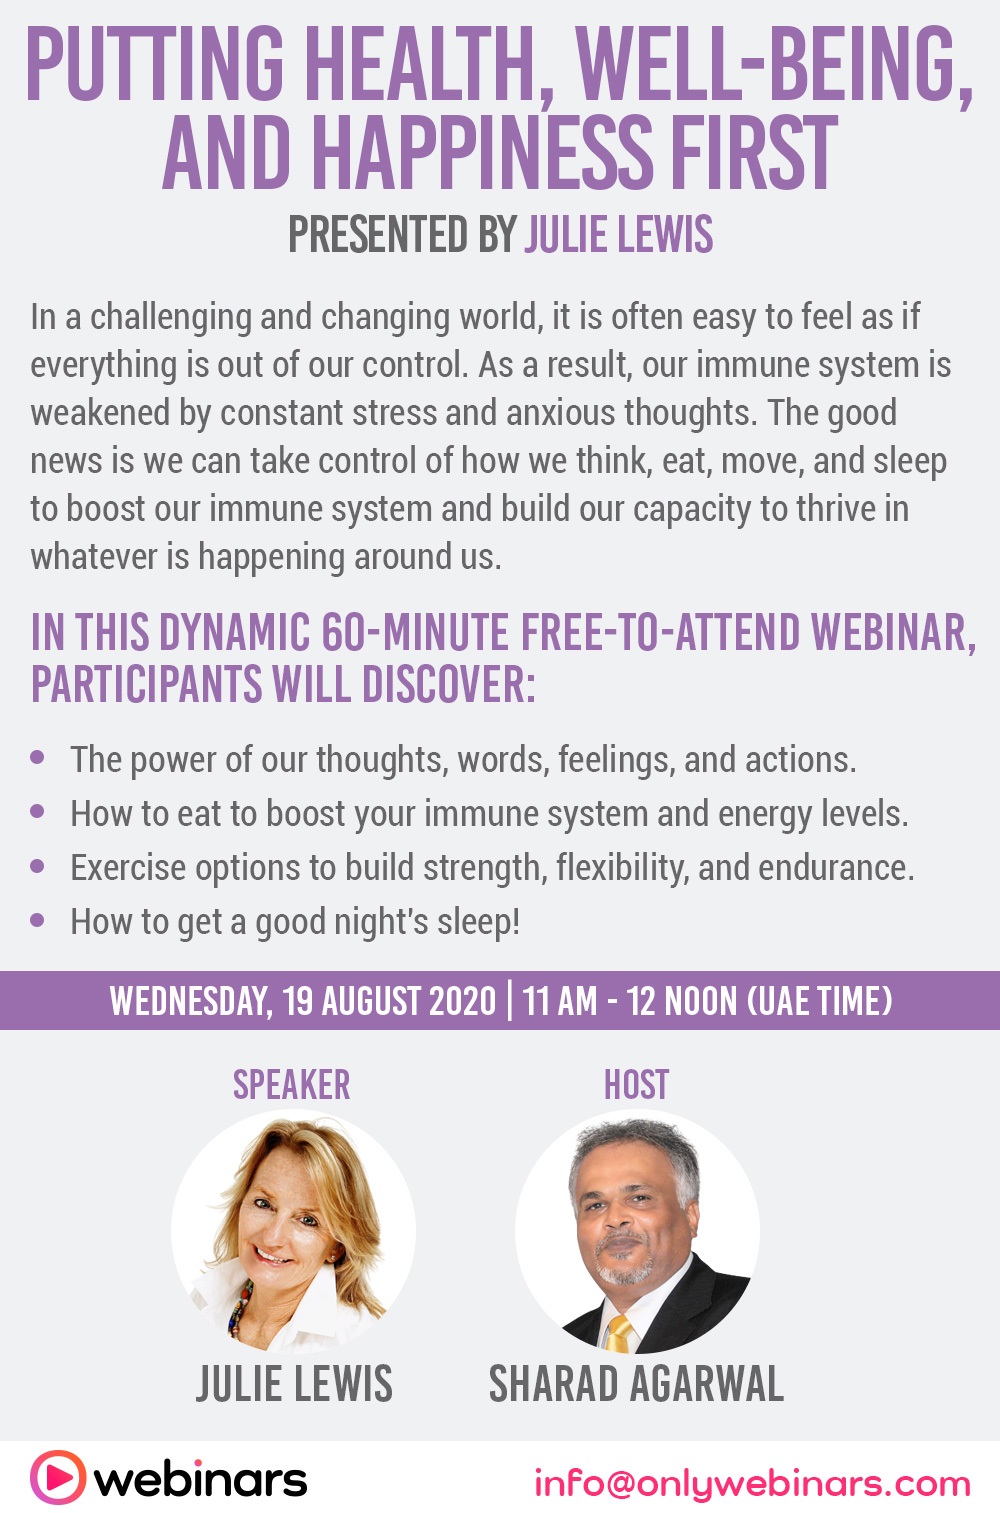 Image for ONLY Webinars Announces ‘Putting Health, Well-Being, And Happiness First’ Webinar